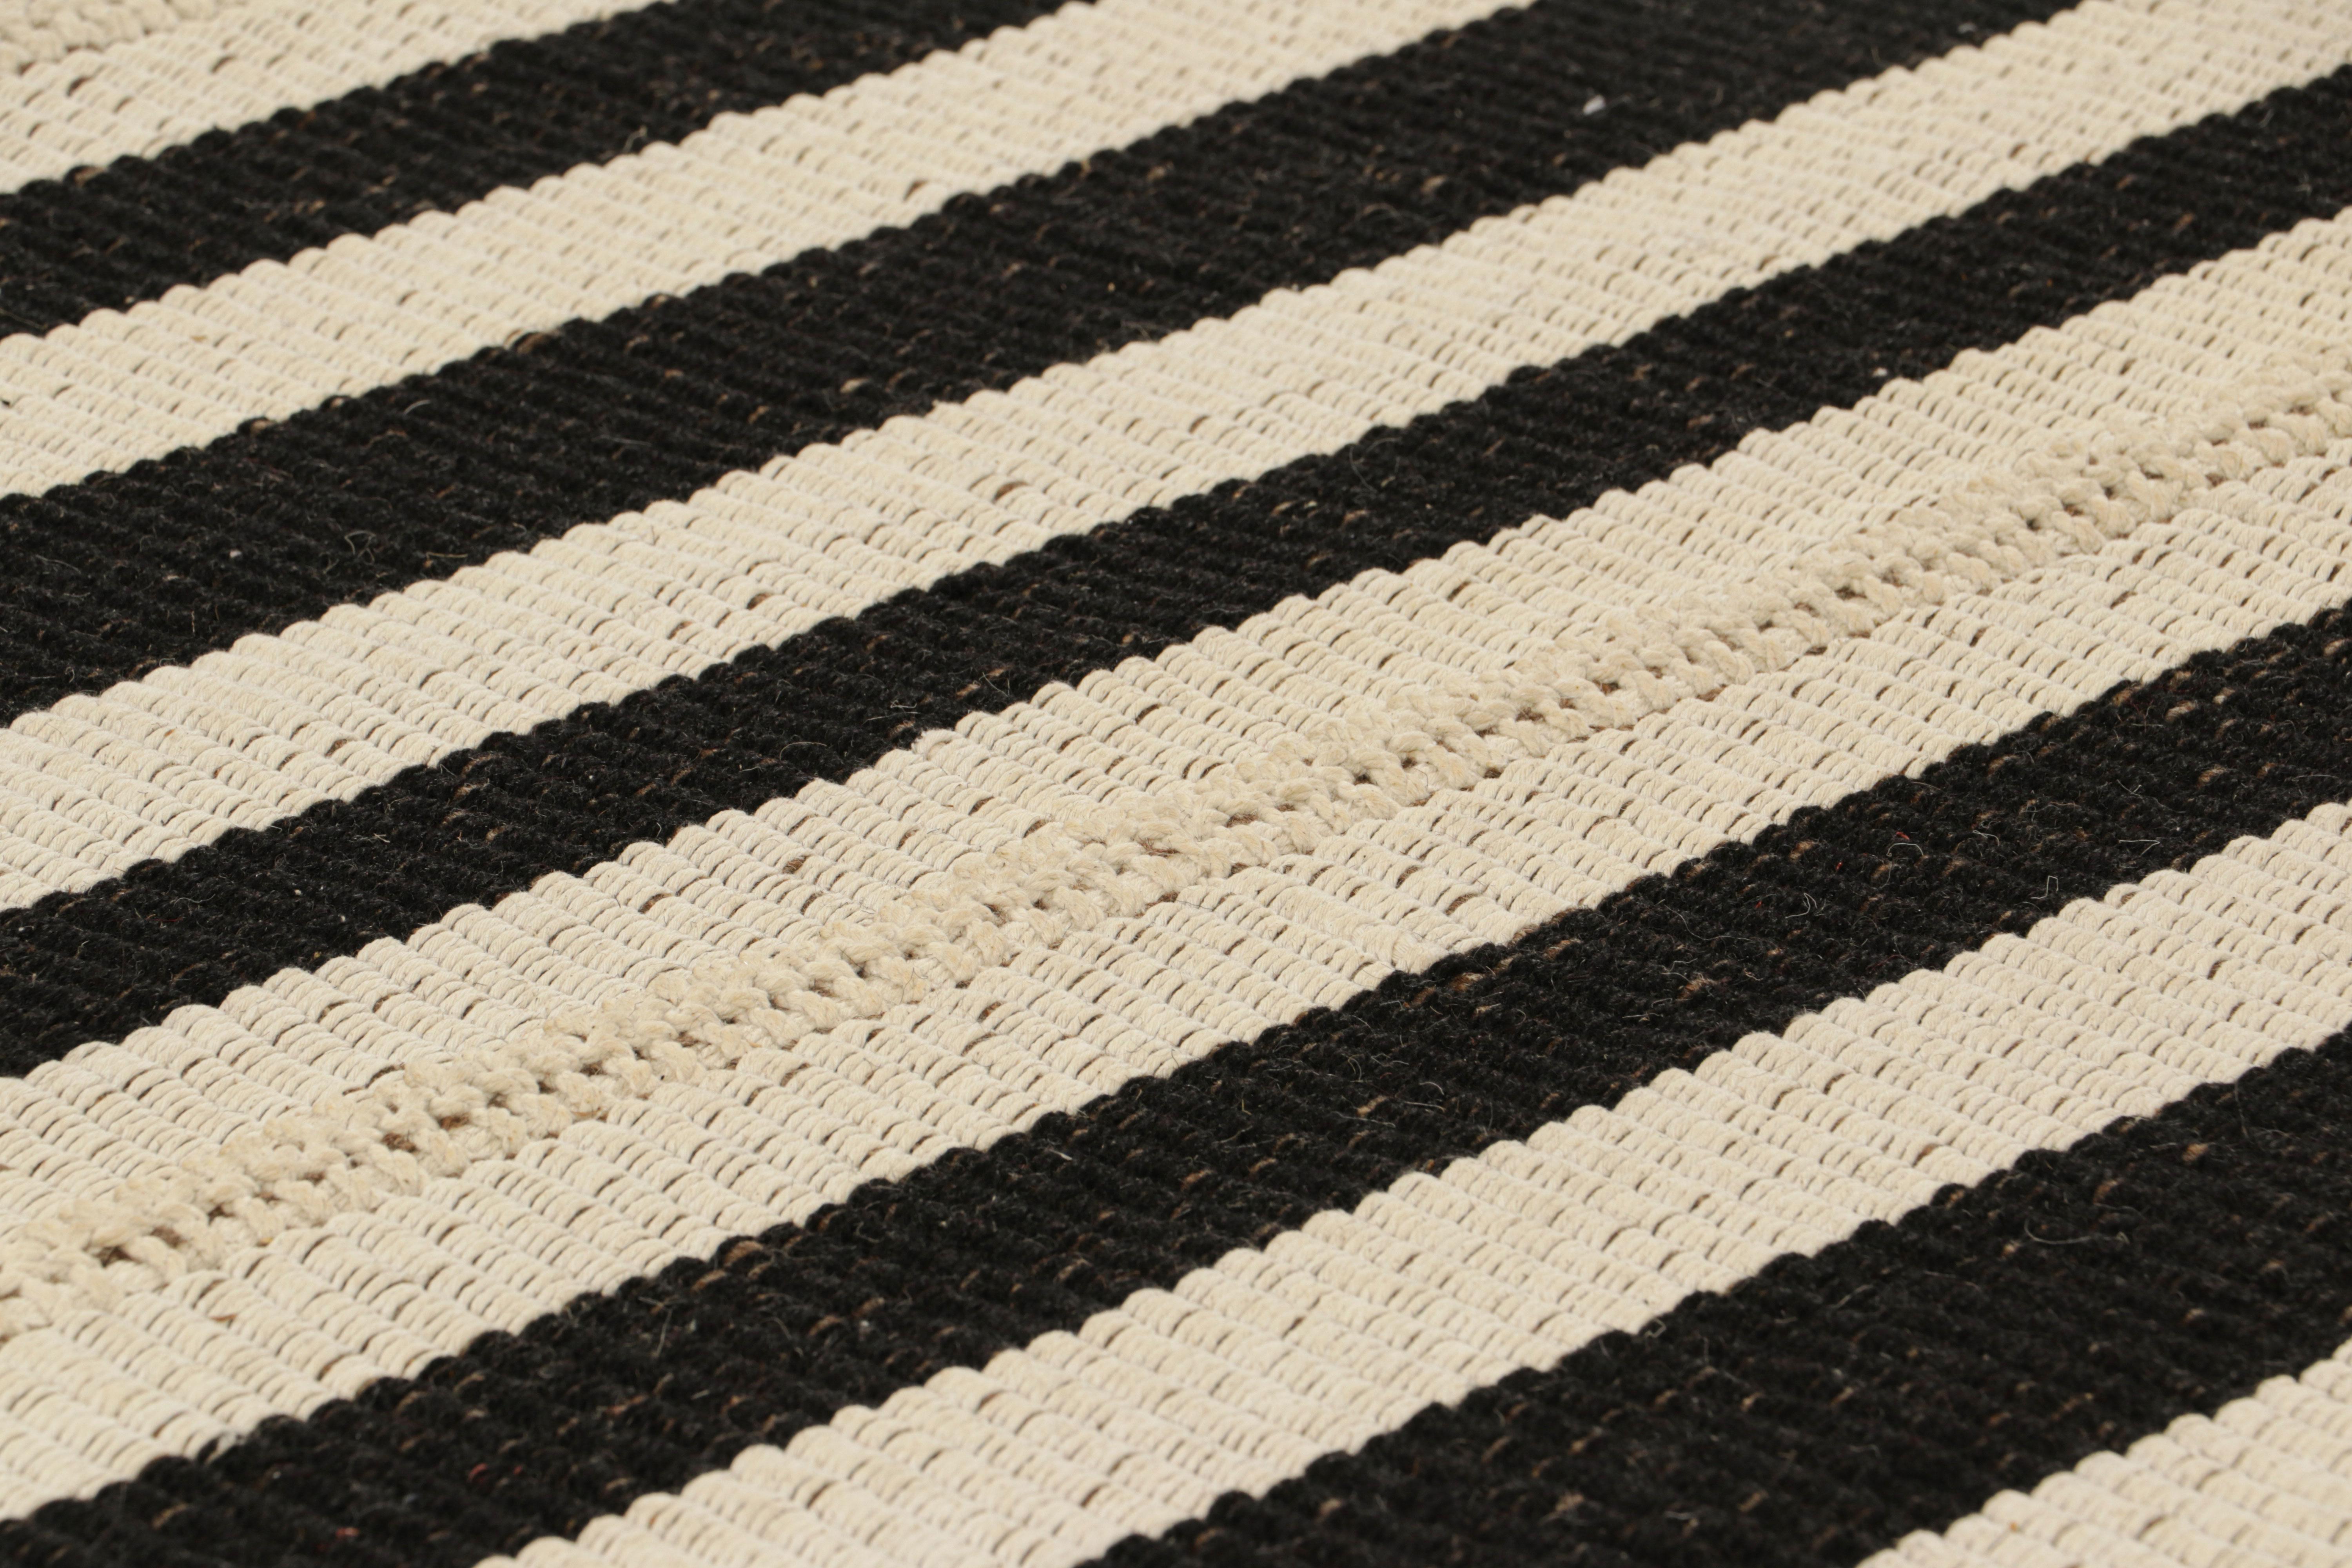 Handwoven in wool, this 10x14 Kilim is from an inventive new contemporary flat weave collection by Rug & Kilim.

On the Design: 

Fondly dubbed, “Rez Kilims”, this modern take on classic panel-weaving enjoys a fabulous, unique play of black and